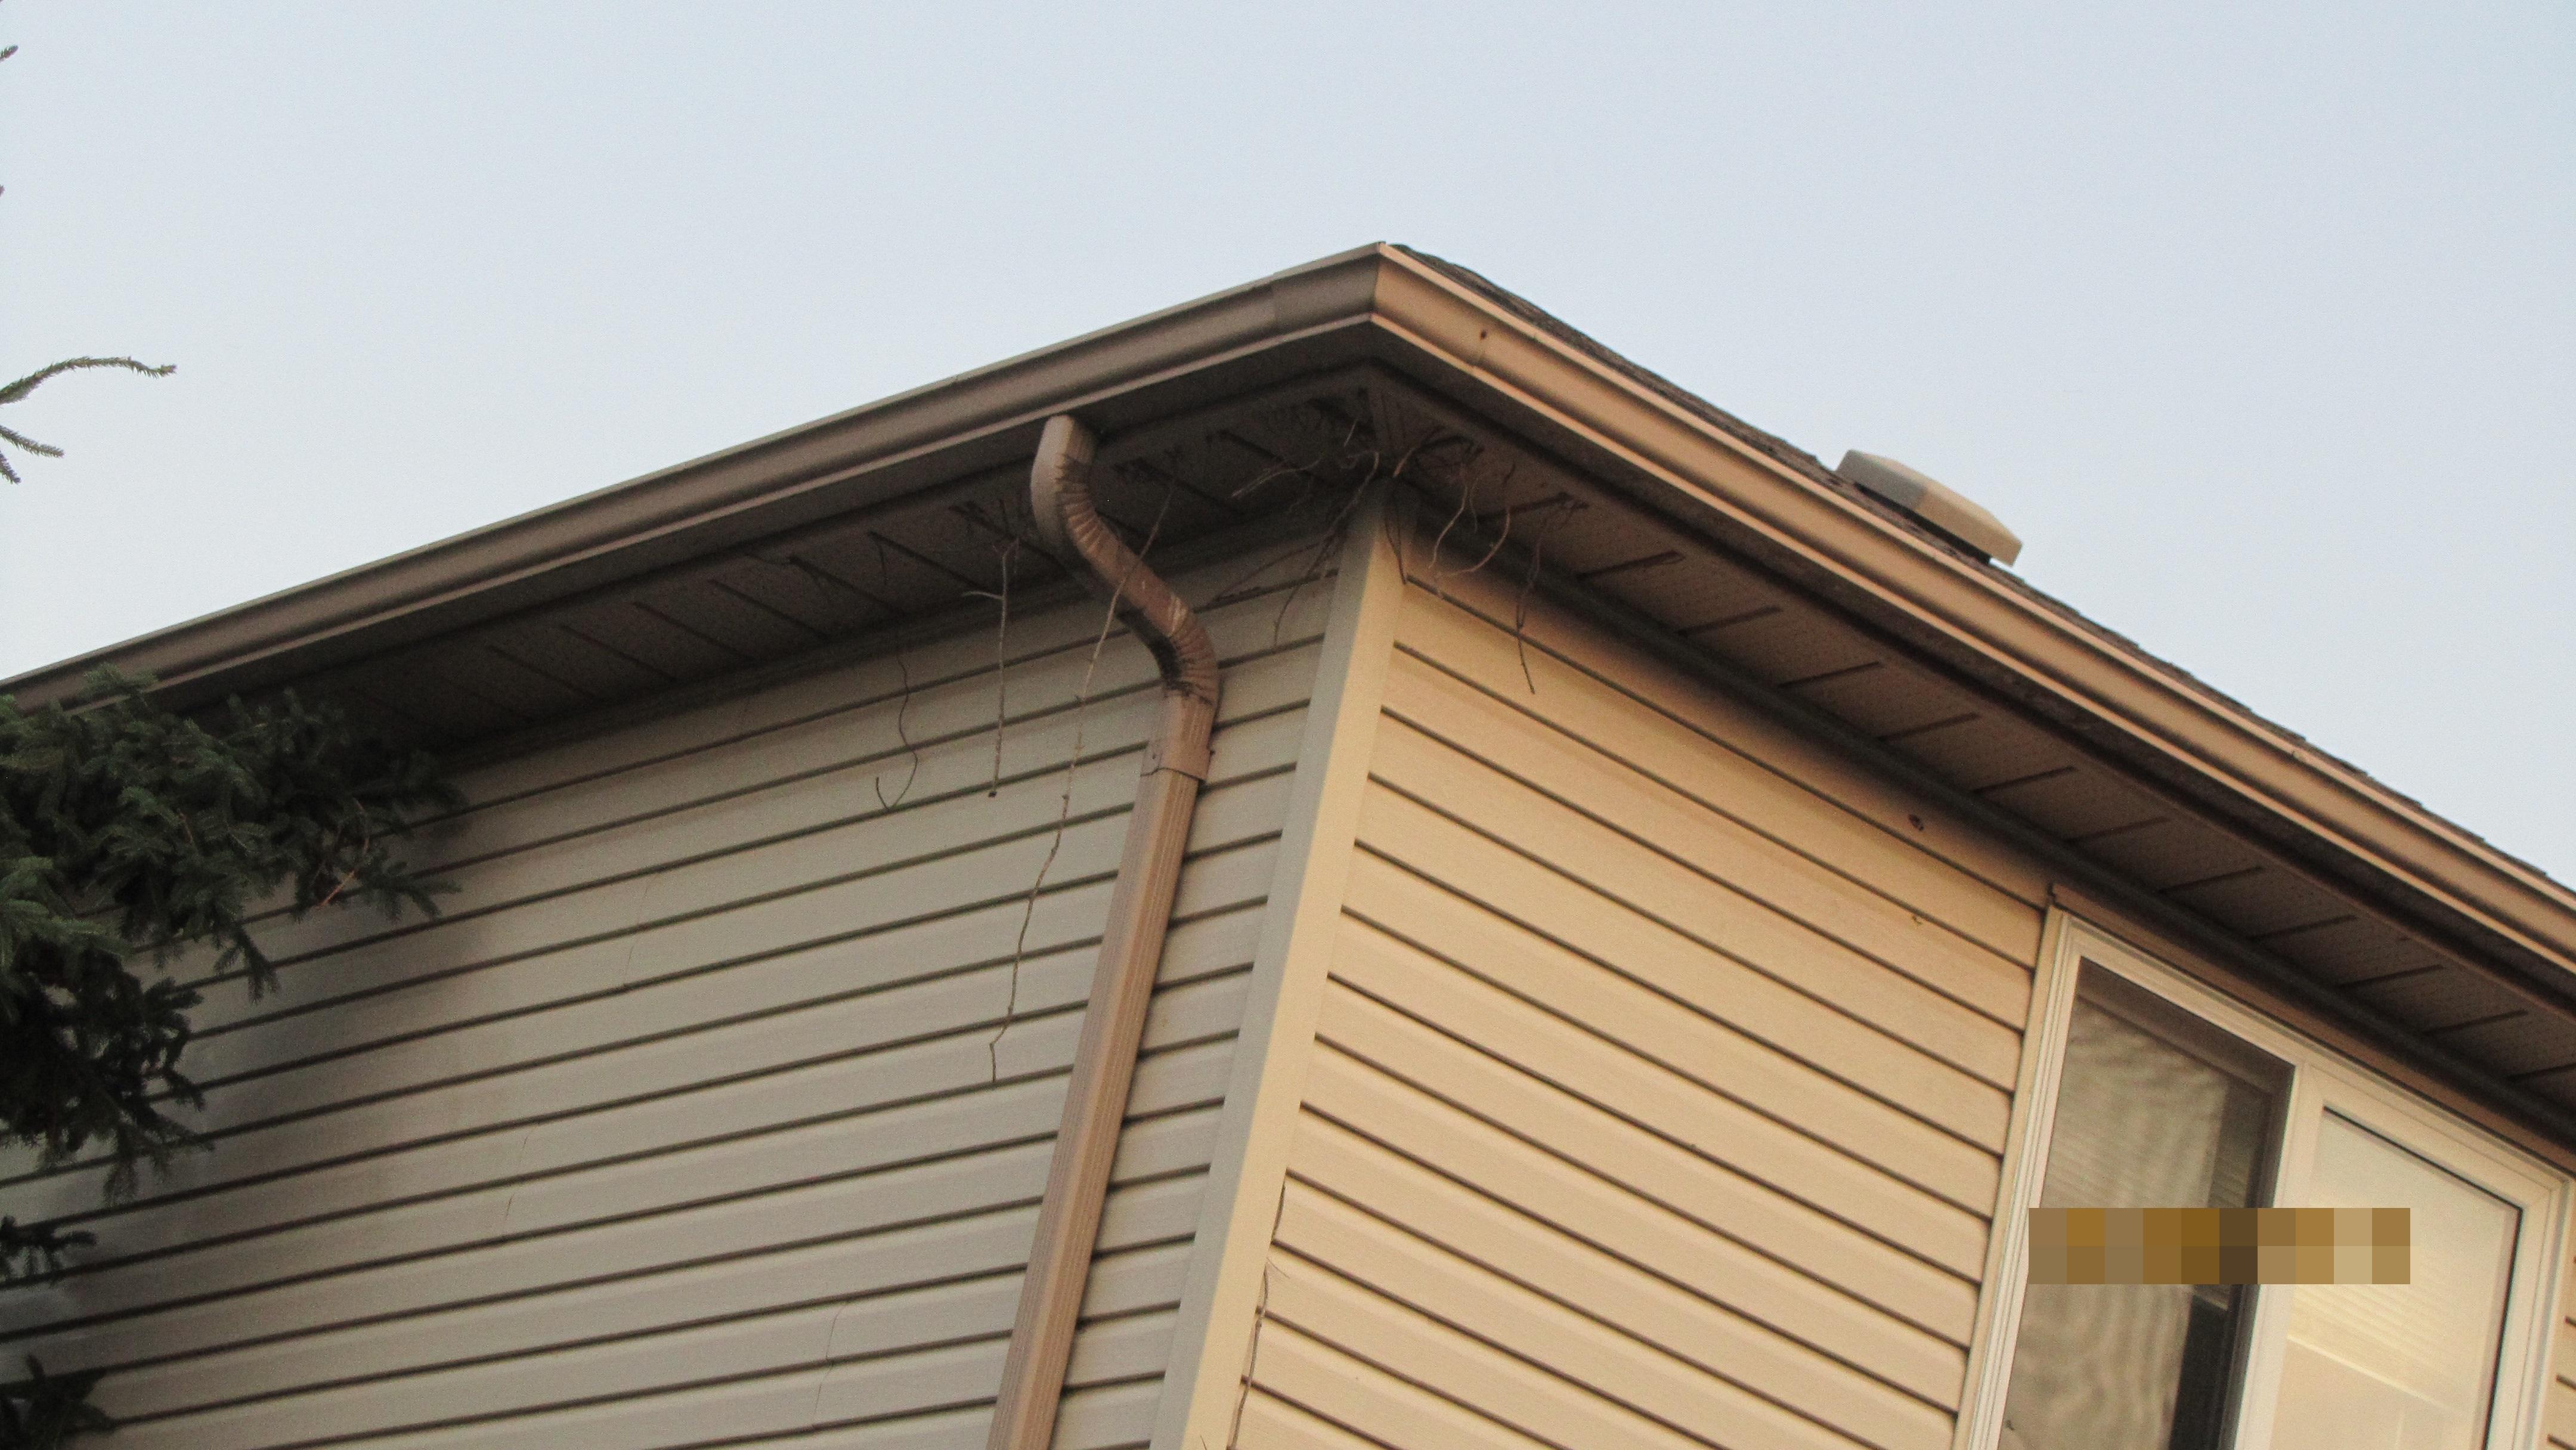 Tree branches coming through Attic